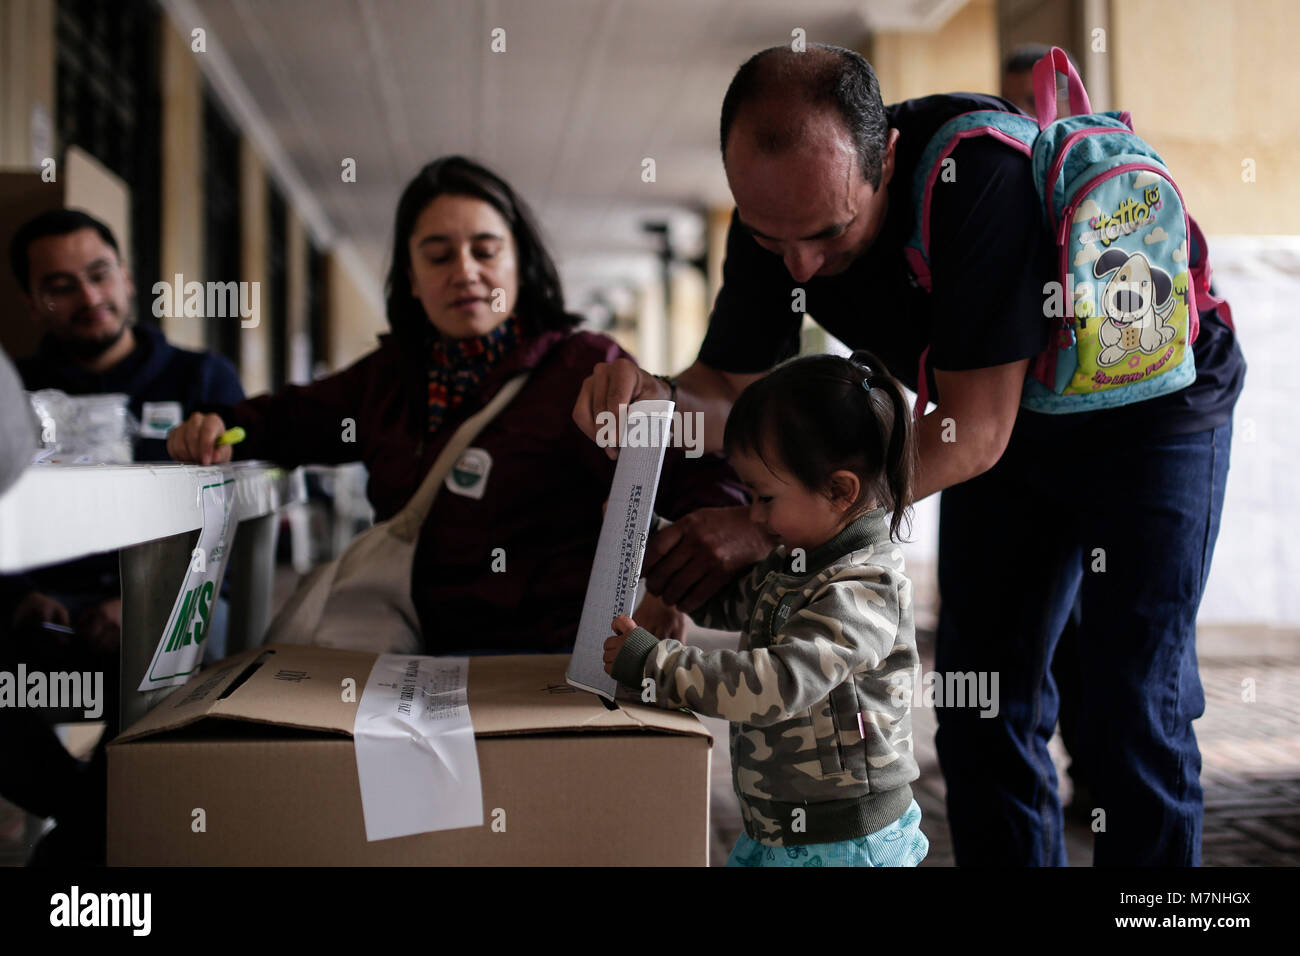 Bogota. 11th Mar, 2018. A man casts ballot during the congressional elections at a polling station in Bogota March 11, 2018. Colombia on Sunday held elections for members of Congress. Credit: Jhon Paz/Xinhua/Alamy Live News Stock Photo